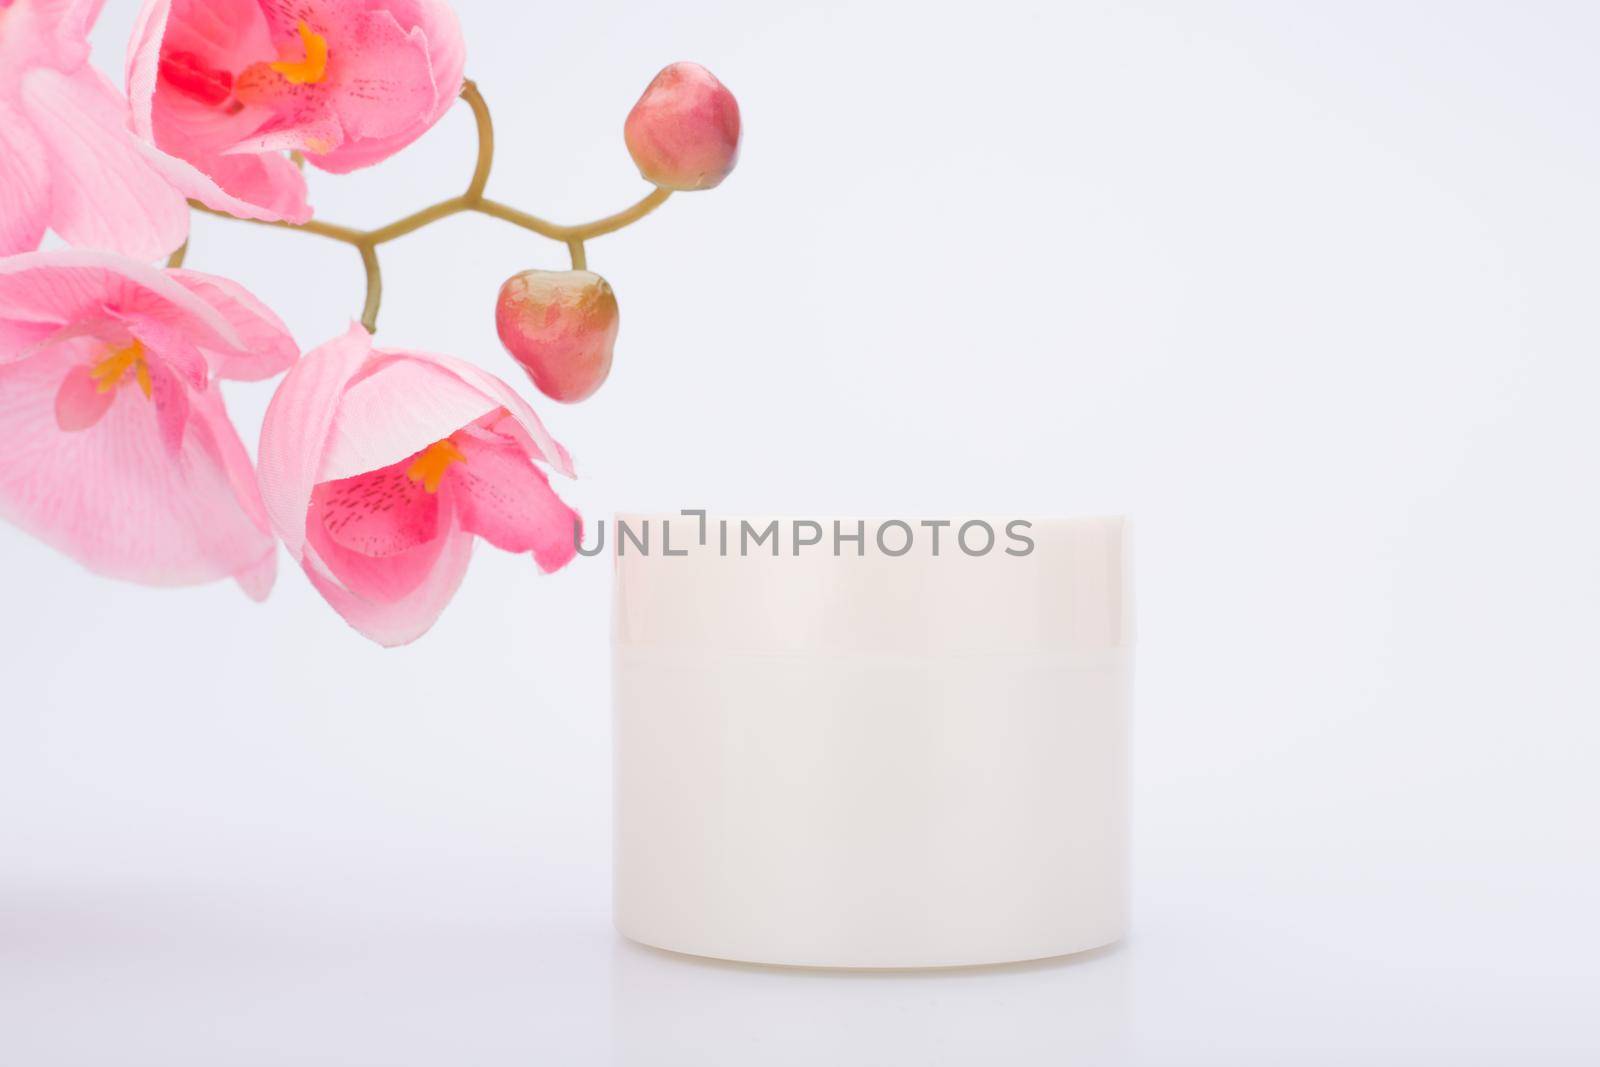 White glossy cream jar against white background with pink flower. Concept of beauty products. Face mask, cream or scrub or hair mask for skin or hair care